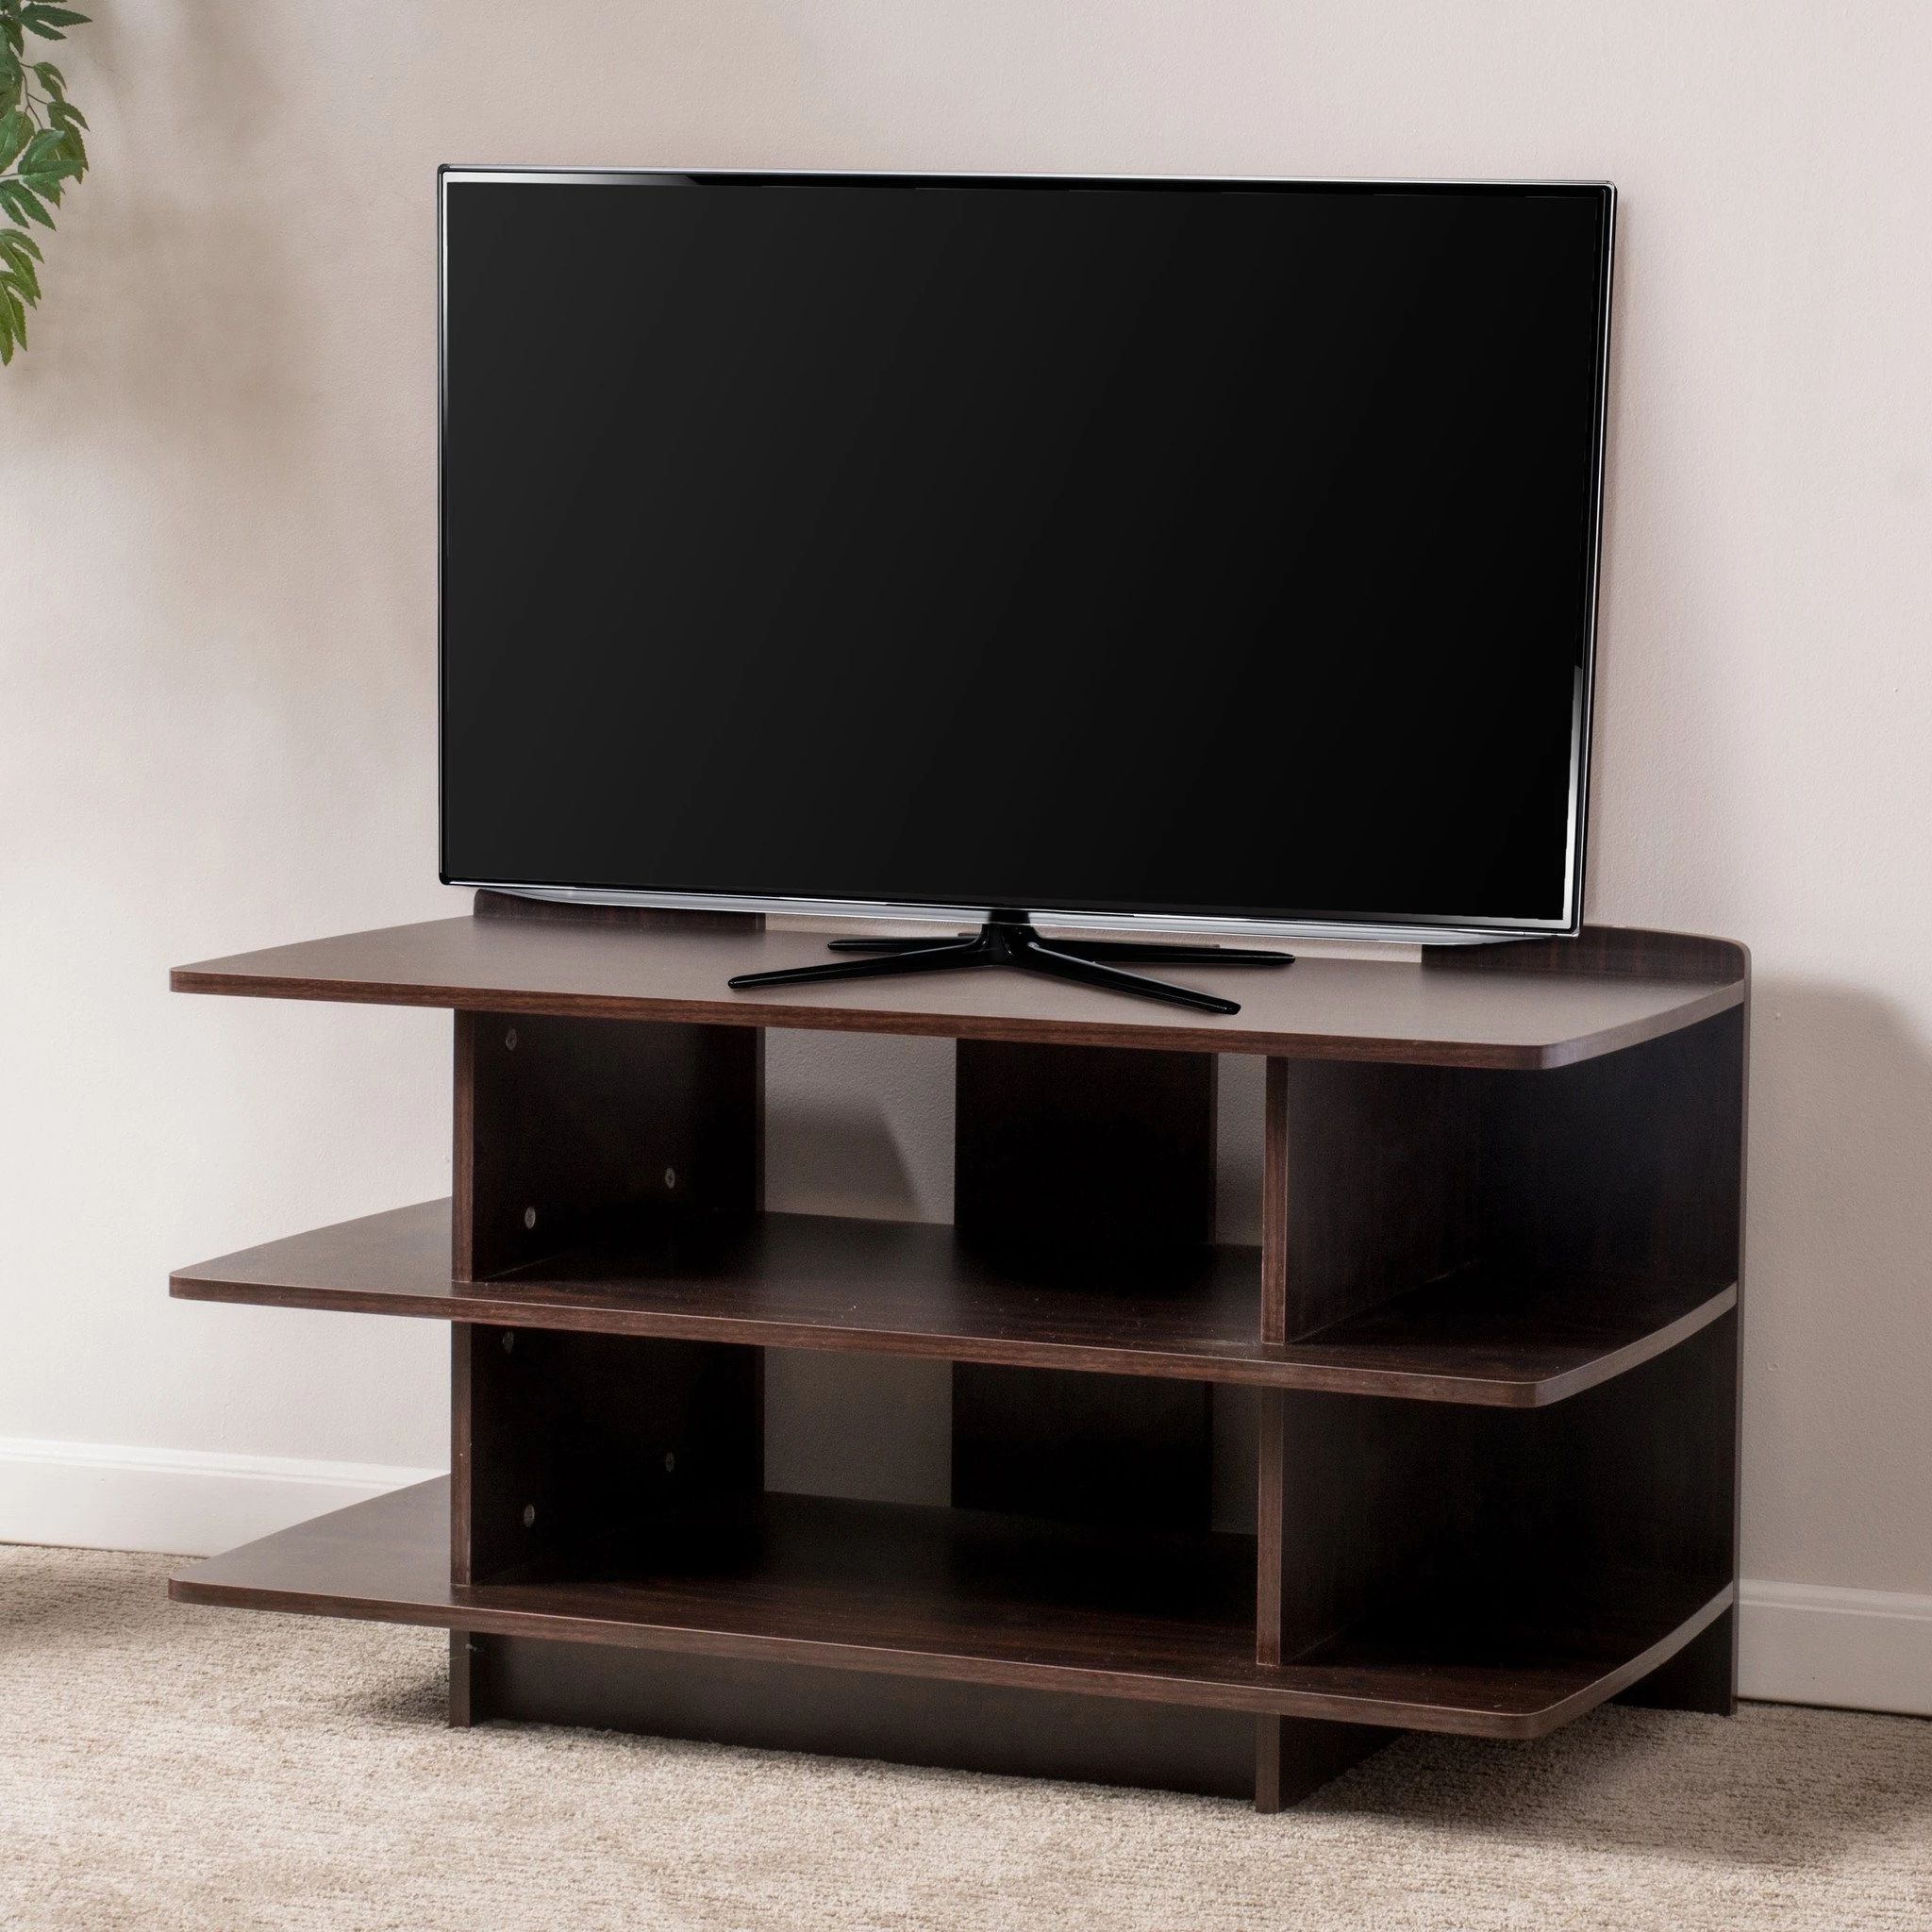 Tier Stand Console Cabinets Throughout Well Known Ian 3 Tier Dark Walnut Wood Tv Console Stand In Tv Stands From (View 3 of 15)